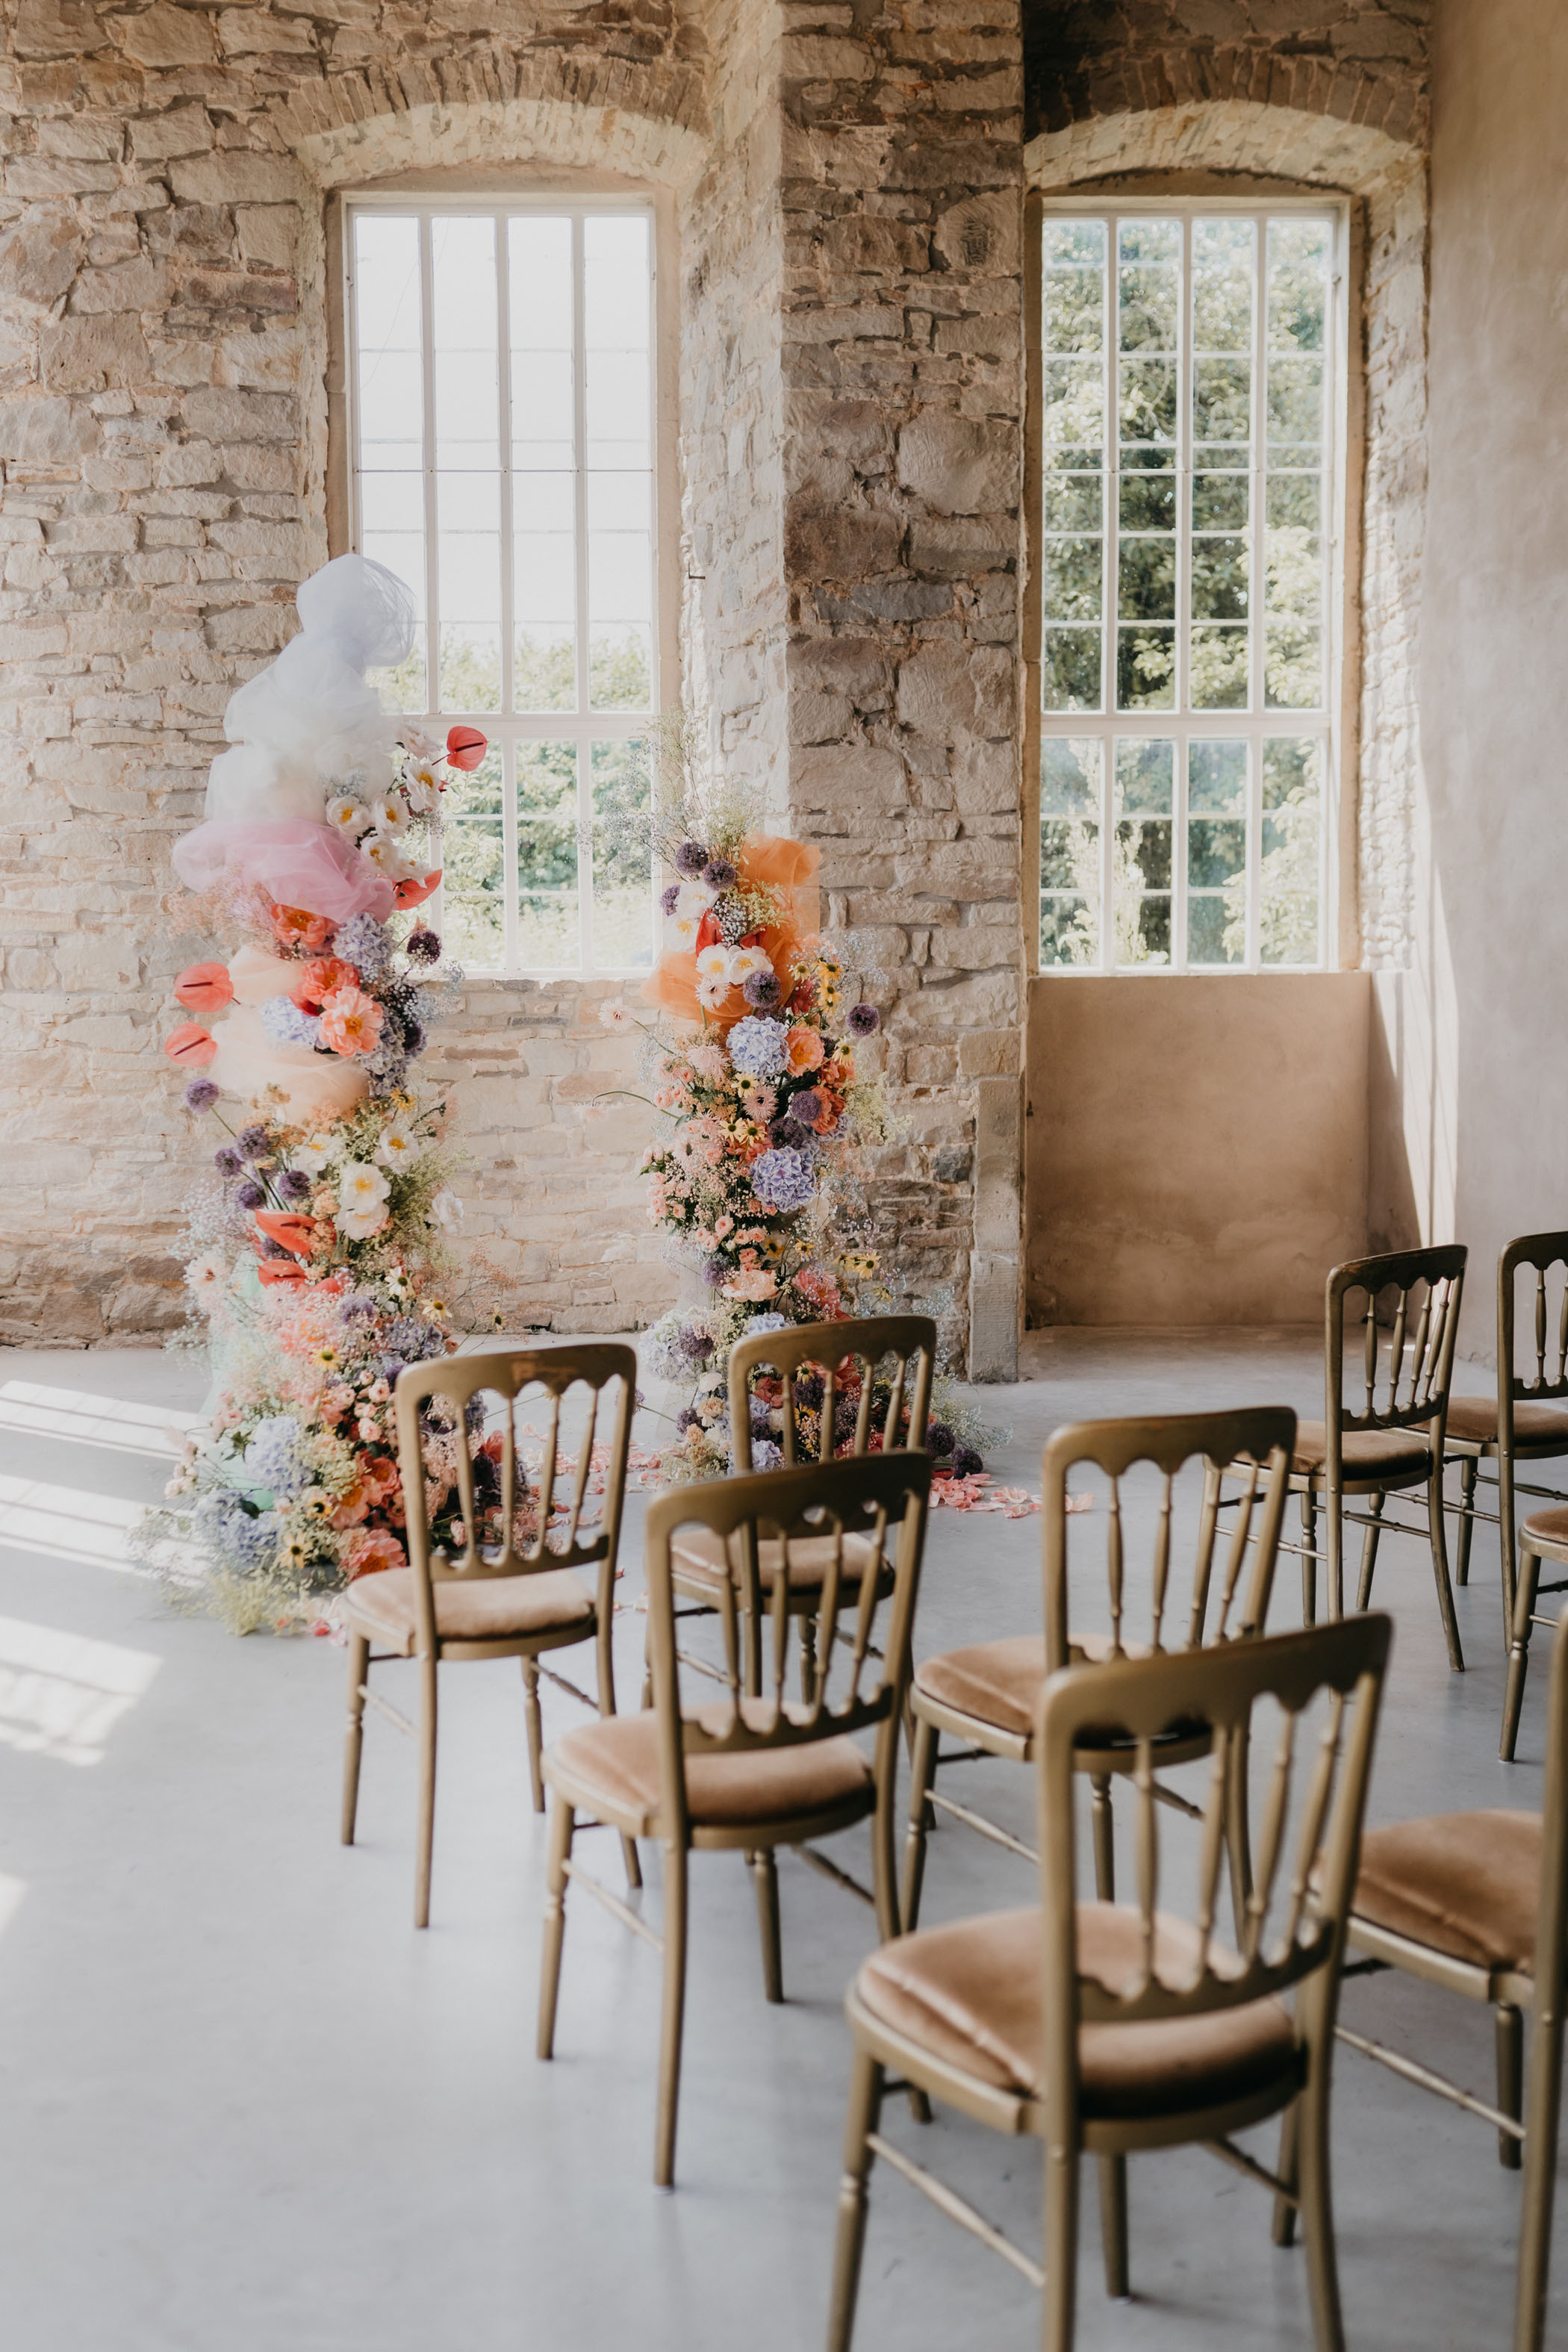 Colorful Floral Wedding Inspiration